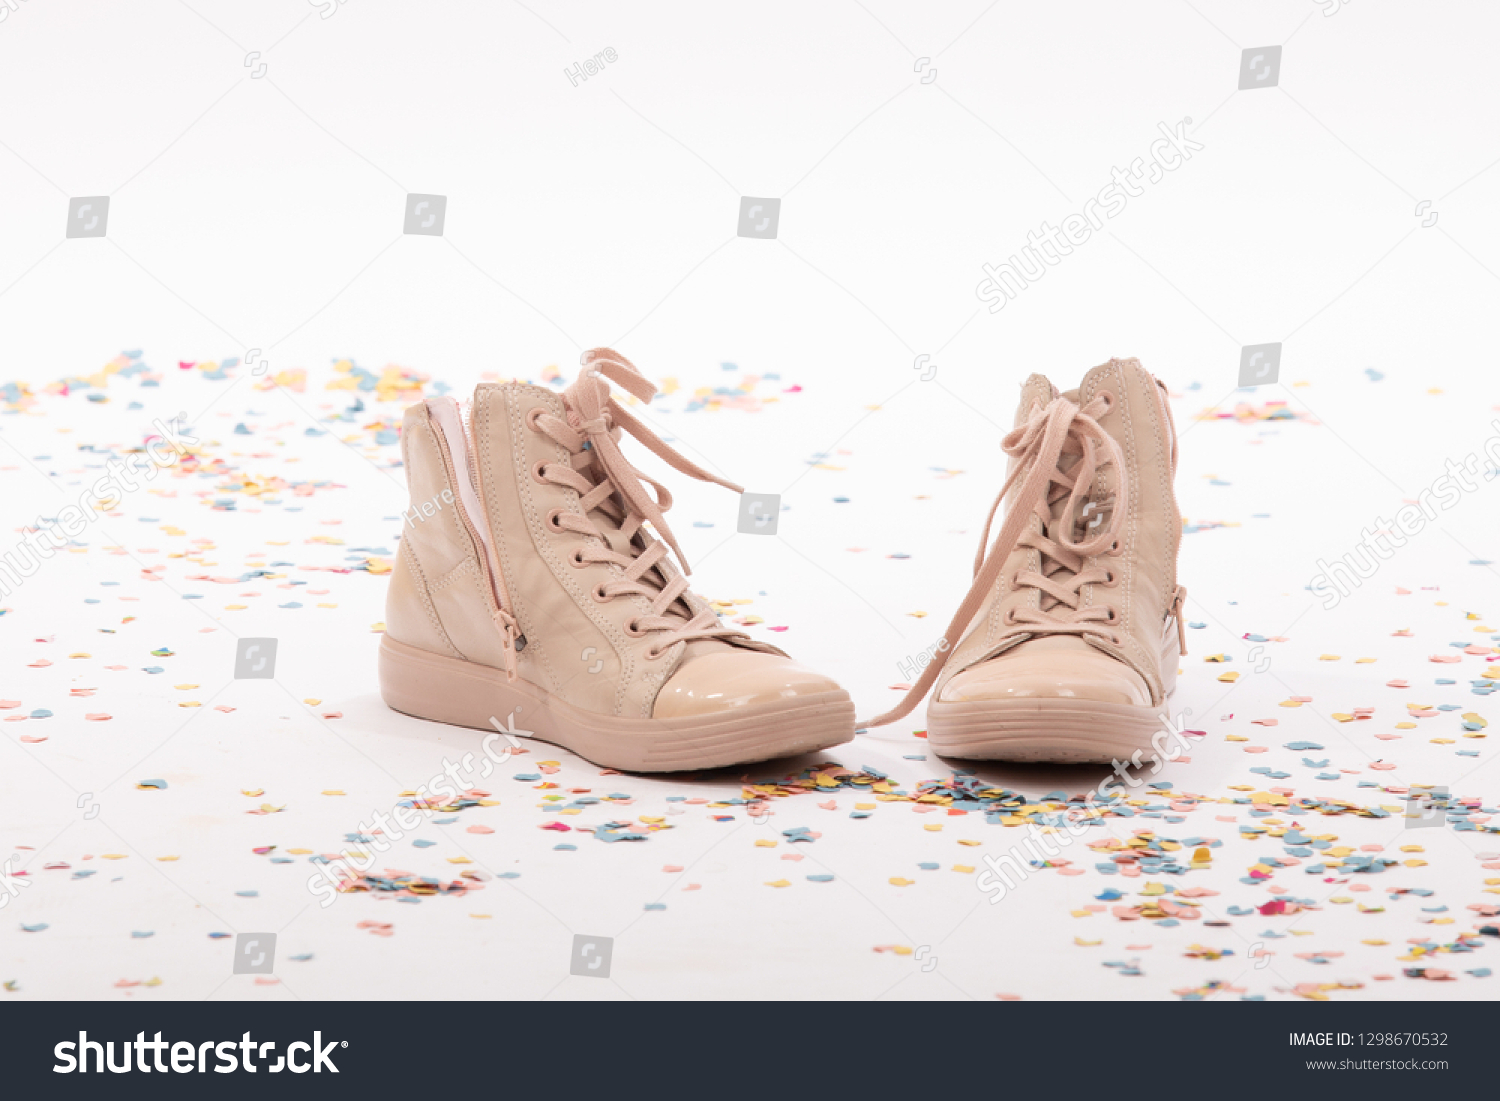 stock photo pair of fashionable shoes with laces for teen girls on white background with confetti birthday 1298670532